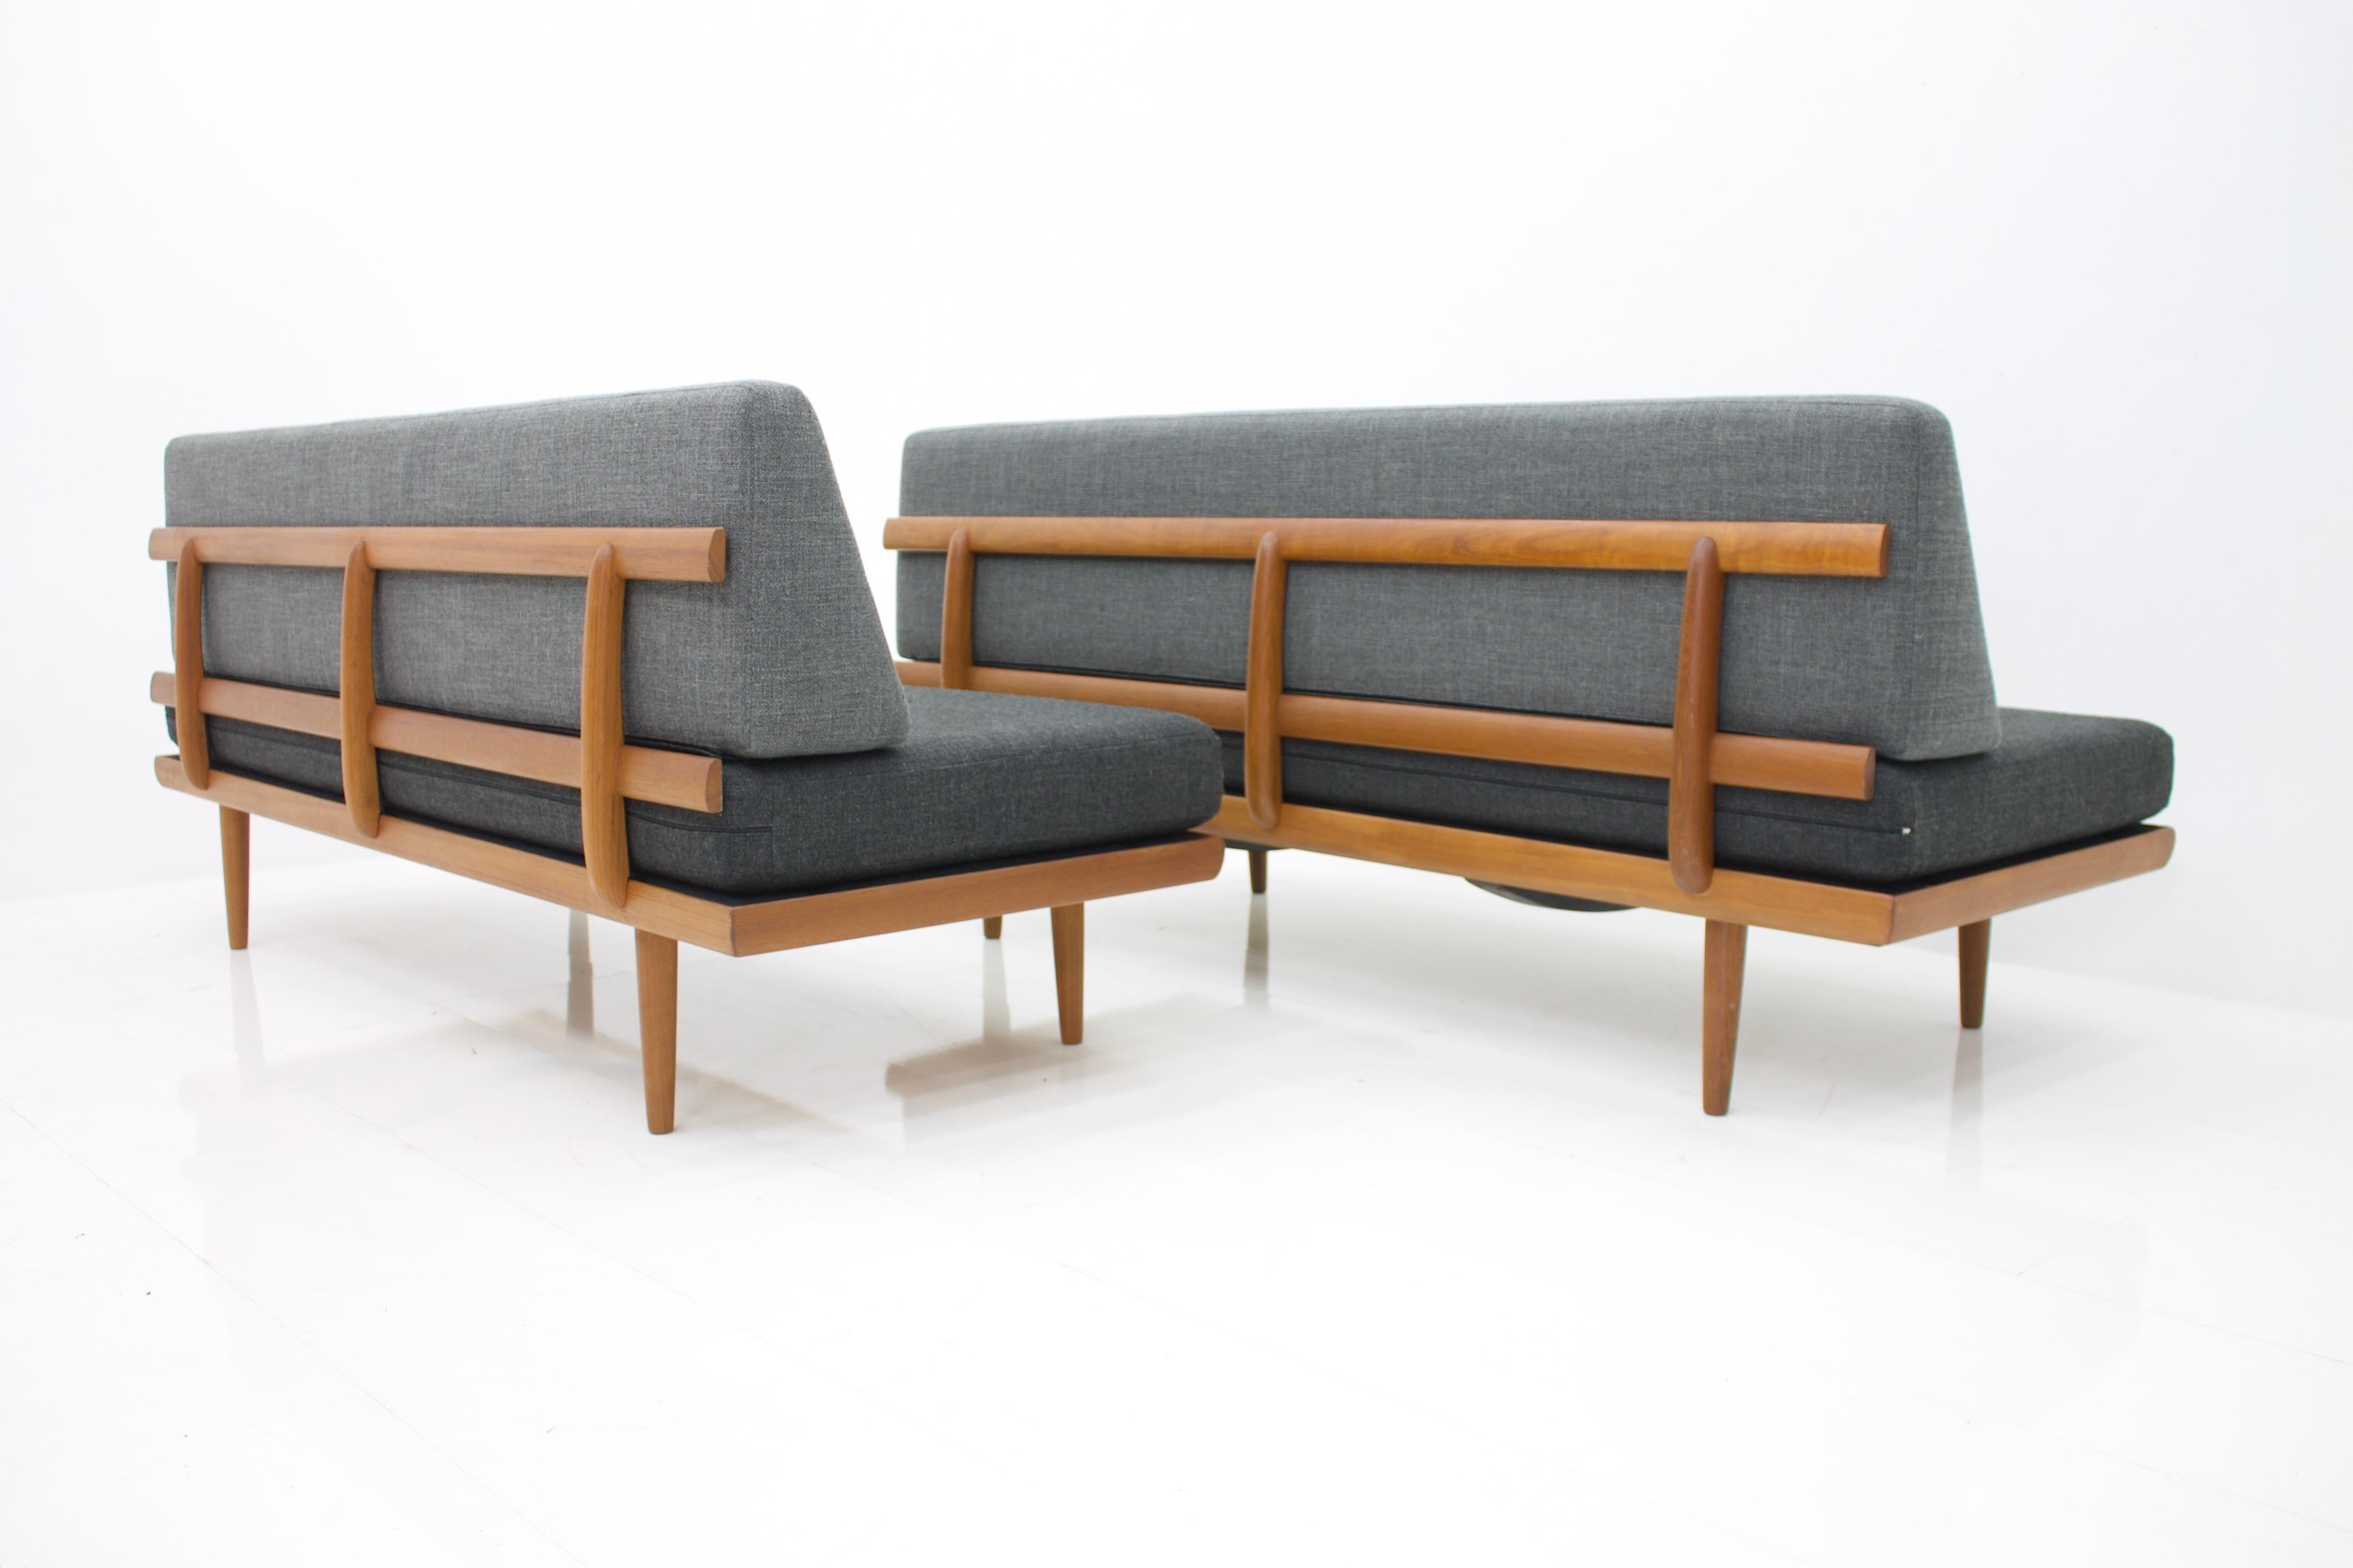 Mid-20th Century Tove & Edvard Kindt-Larsen Sofa Daybed Bench by Gustav Bahus Norway, 1960s